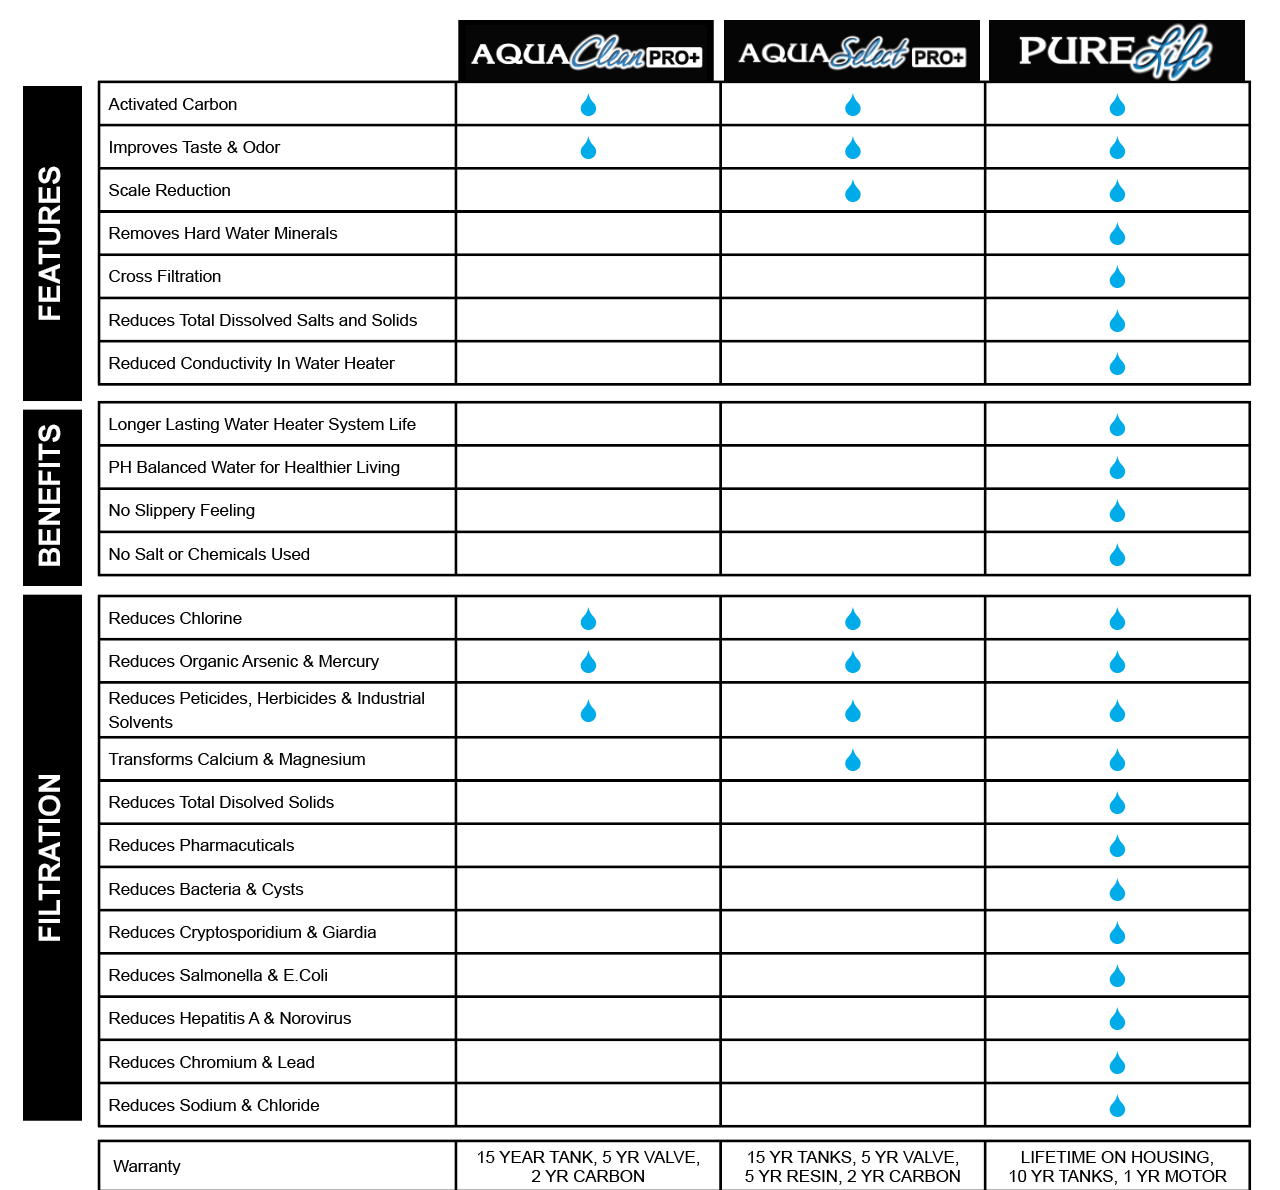 Water Filter Comparison Chart